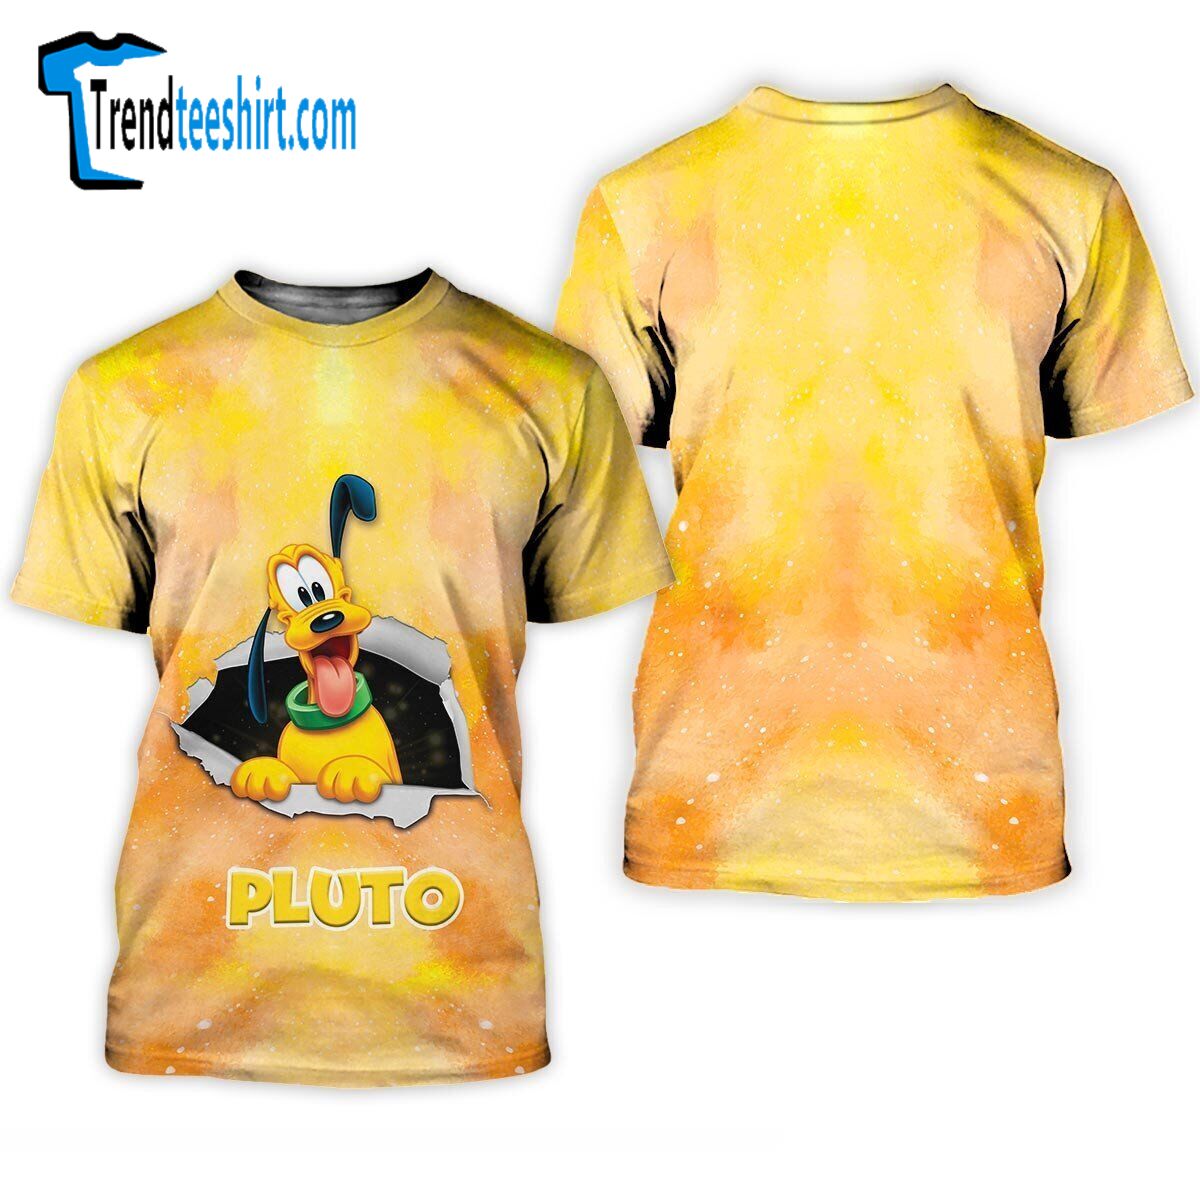 Pluto Cracking Galaxy Pattern Mother's Day Birthday Tshirt 3d Printed